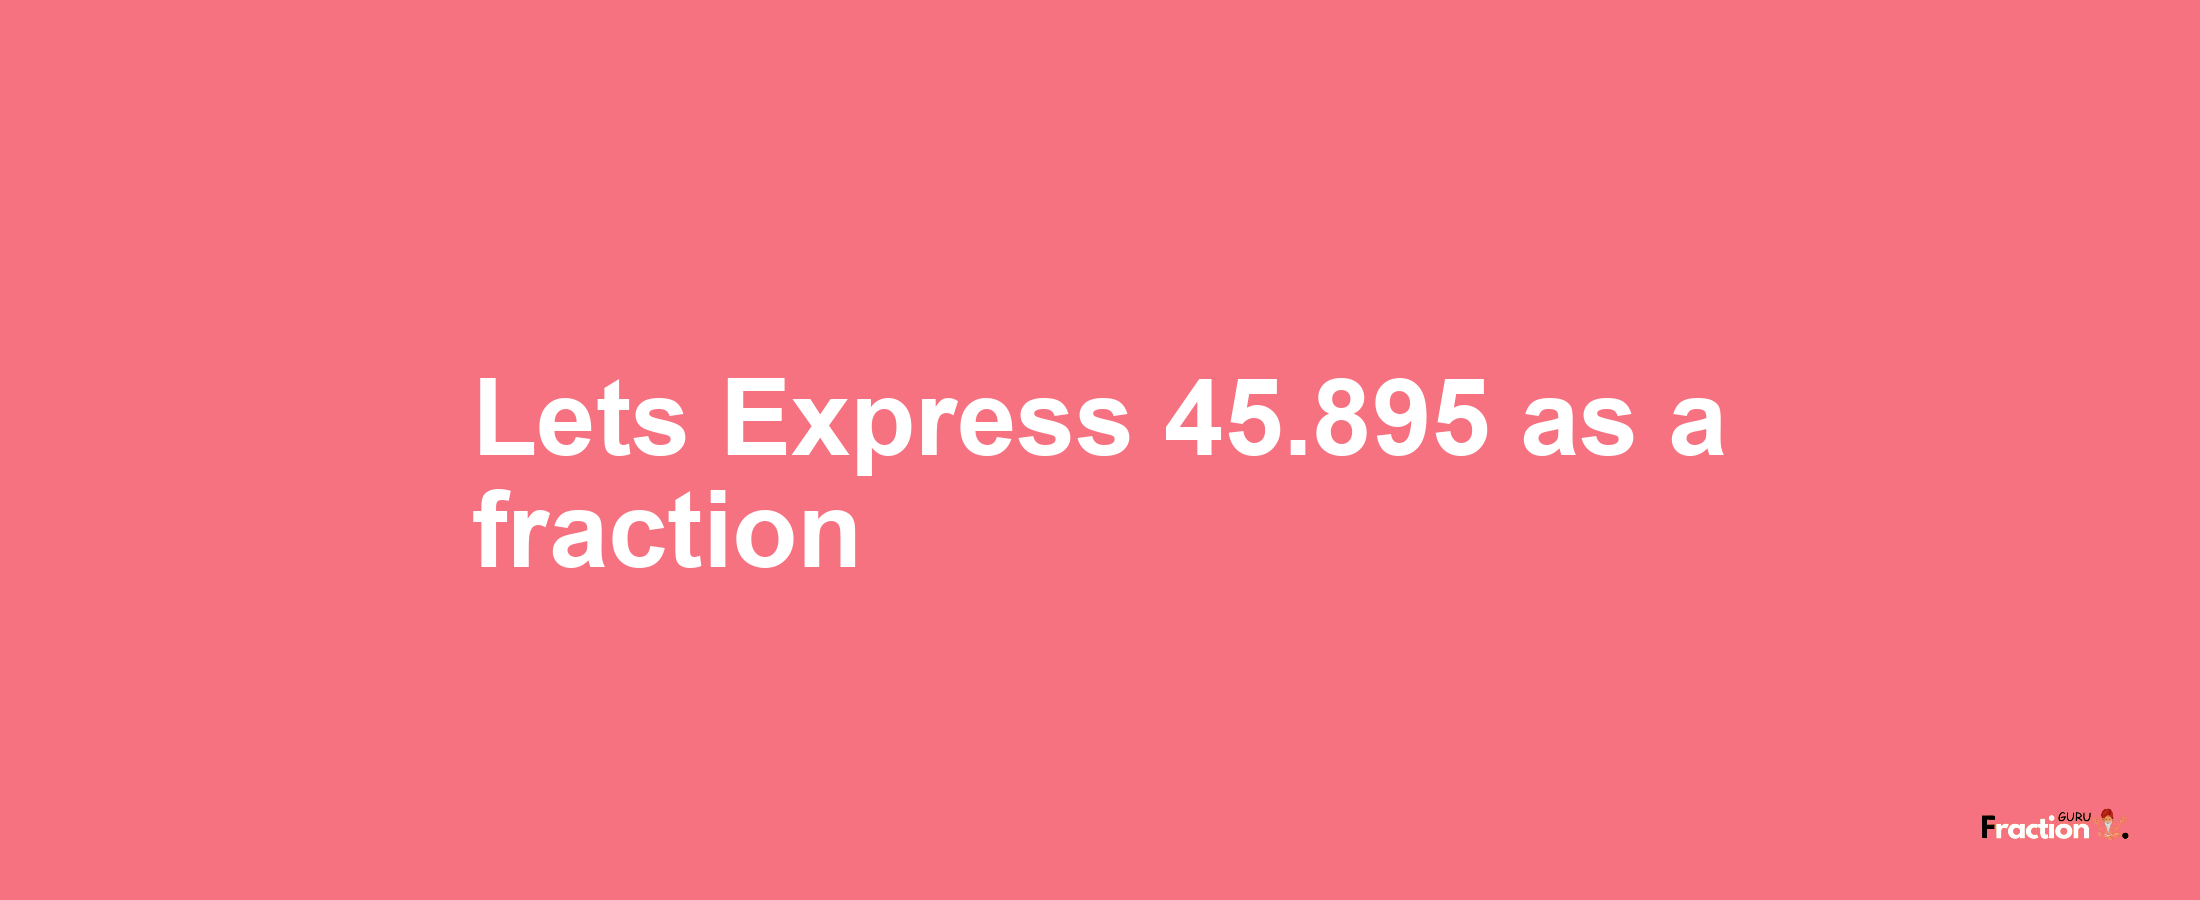 Lets Express 45.895 as afraction